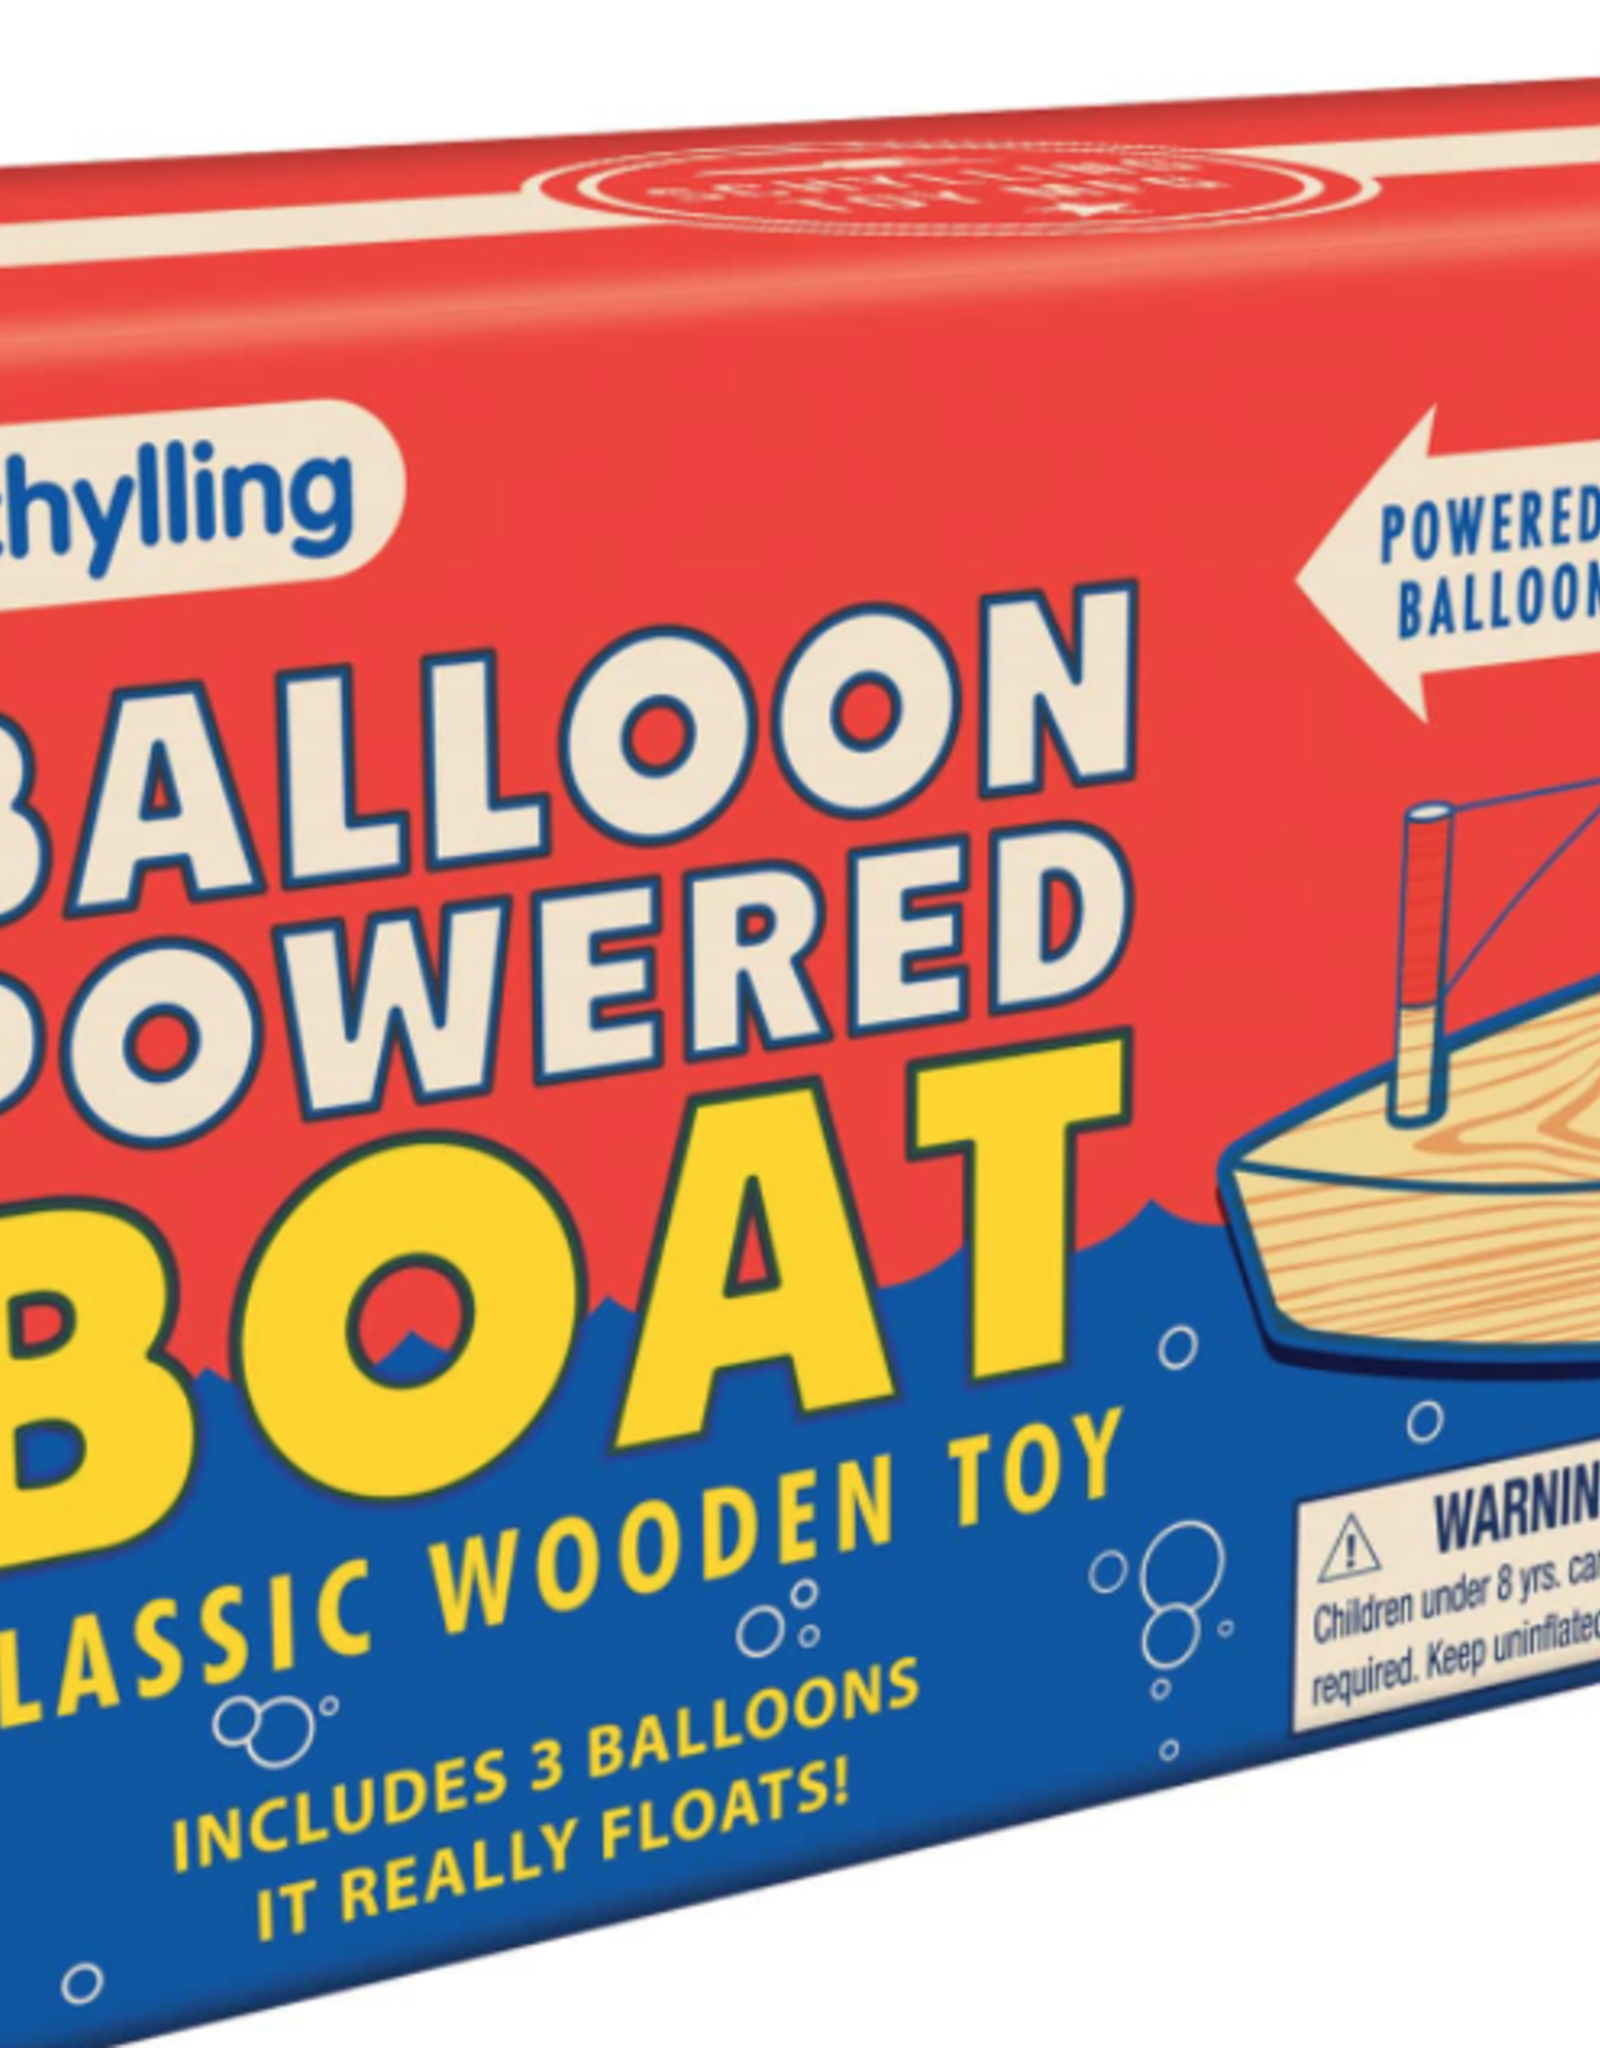 Schylling Balloon Powered Boat